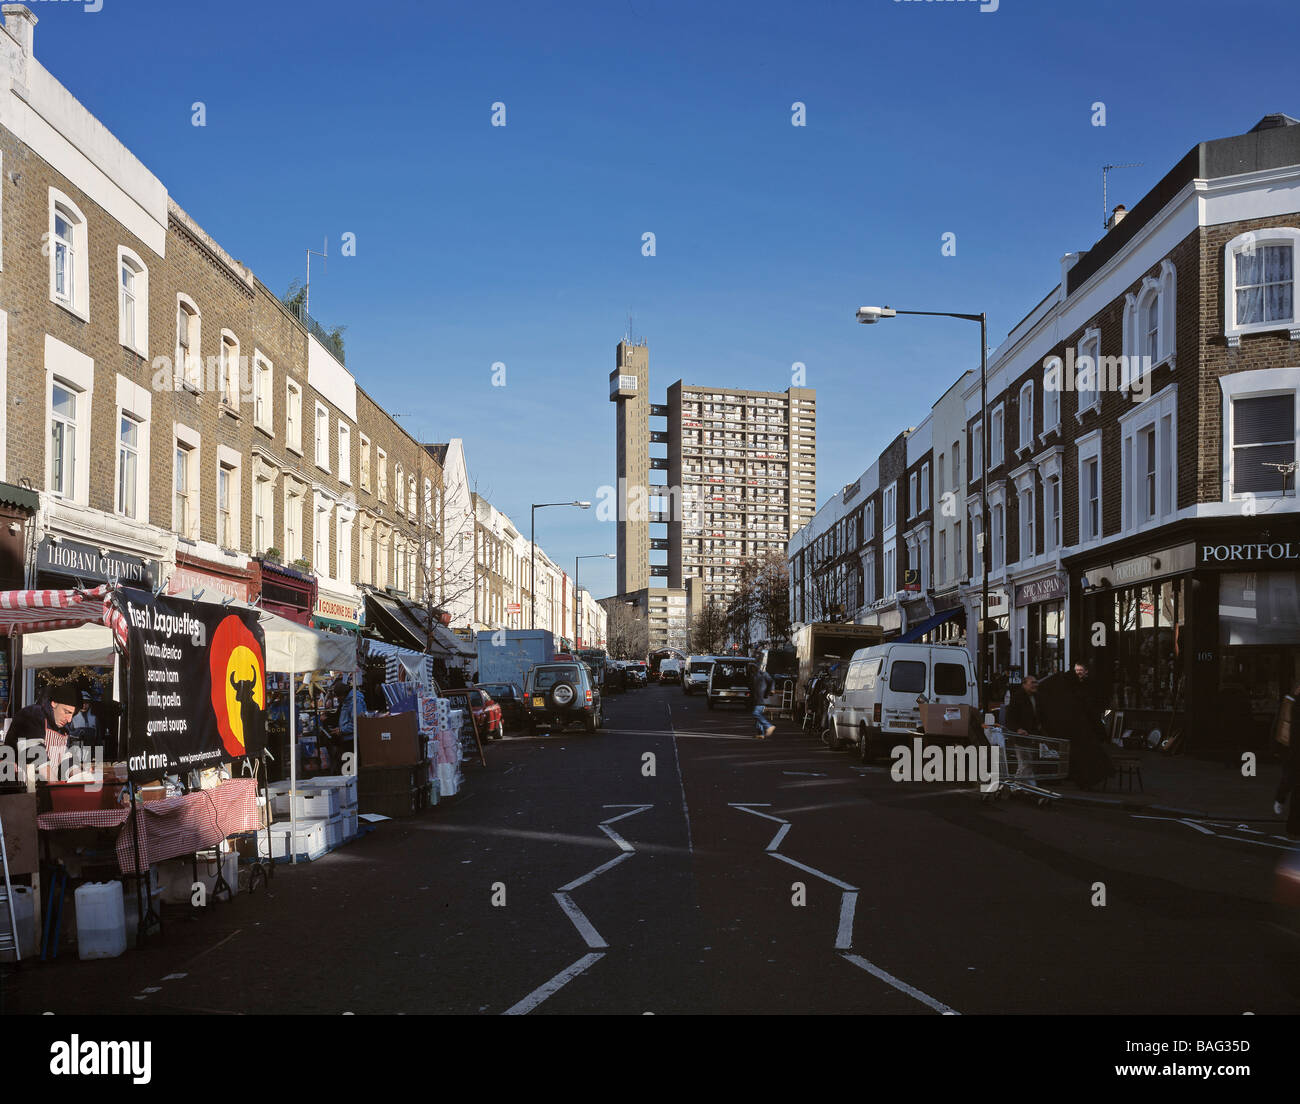 Trellick Tower, London, United Kingdom, Erno Goldfinger, Trellick tower distant view from golbourne road during market. Stock Photo